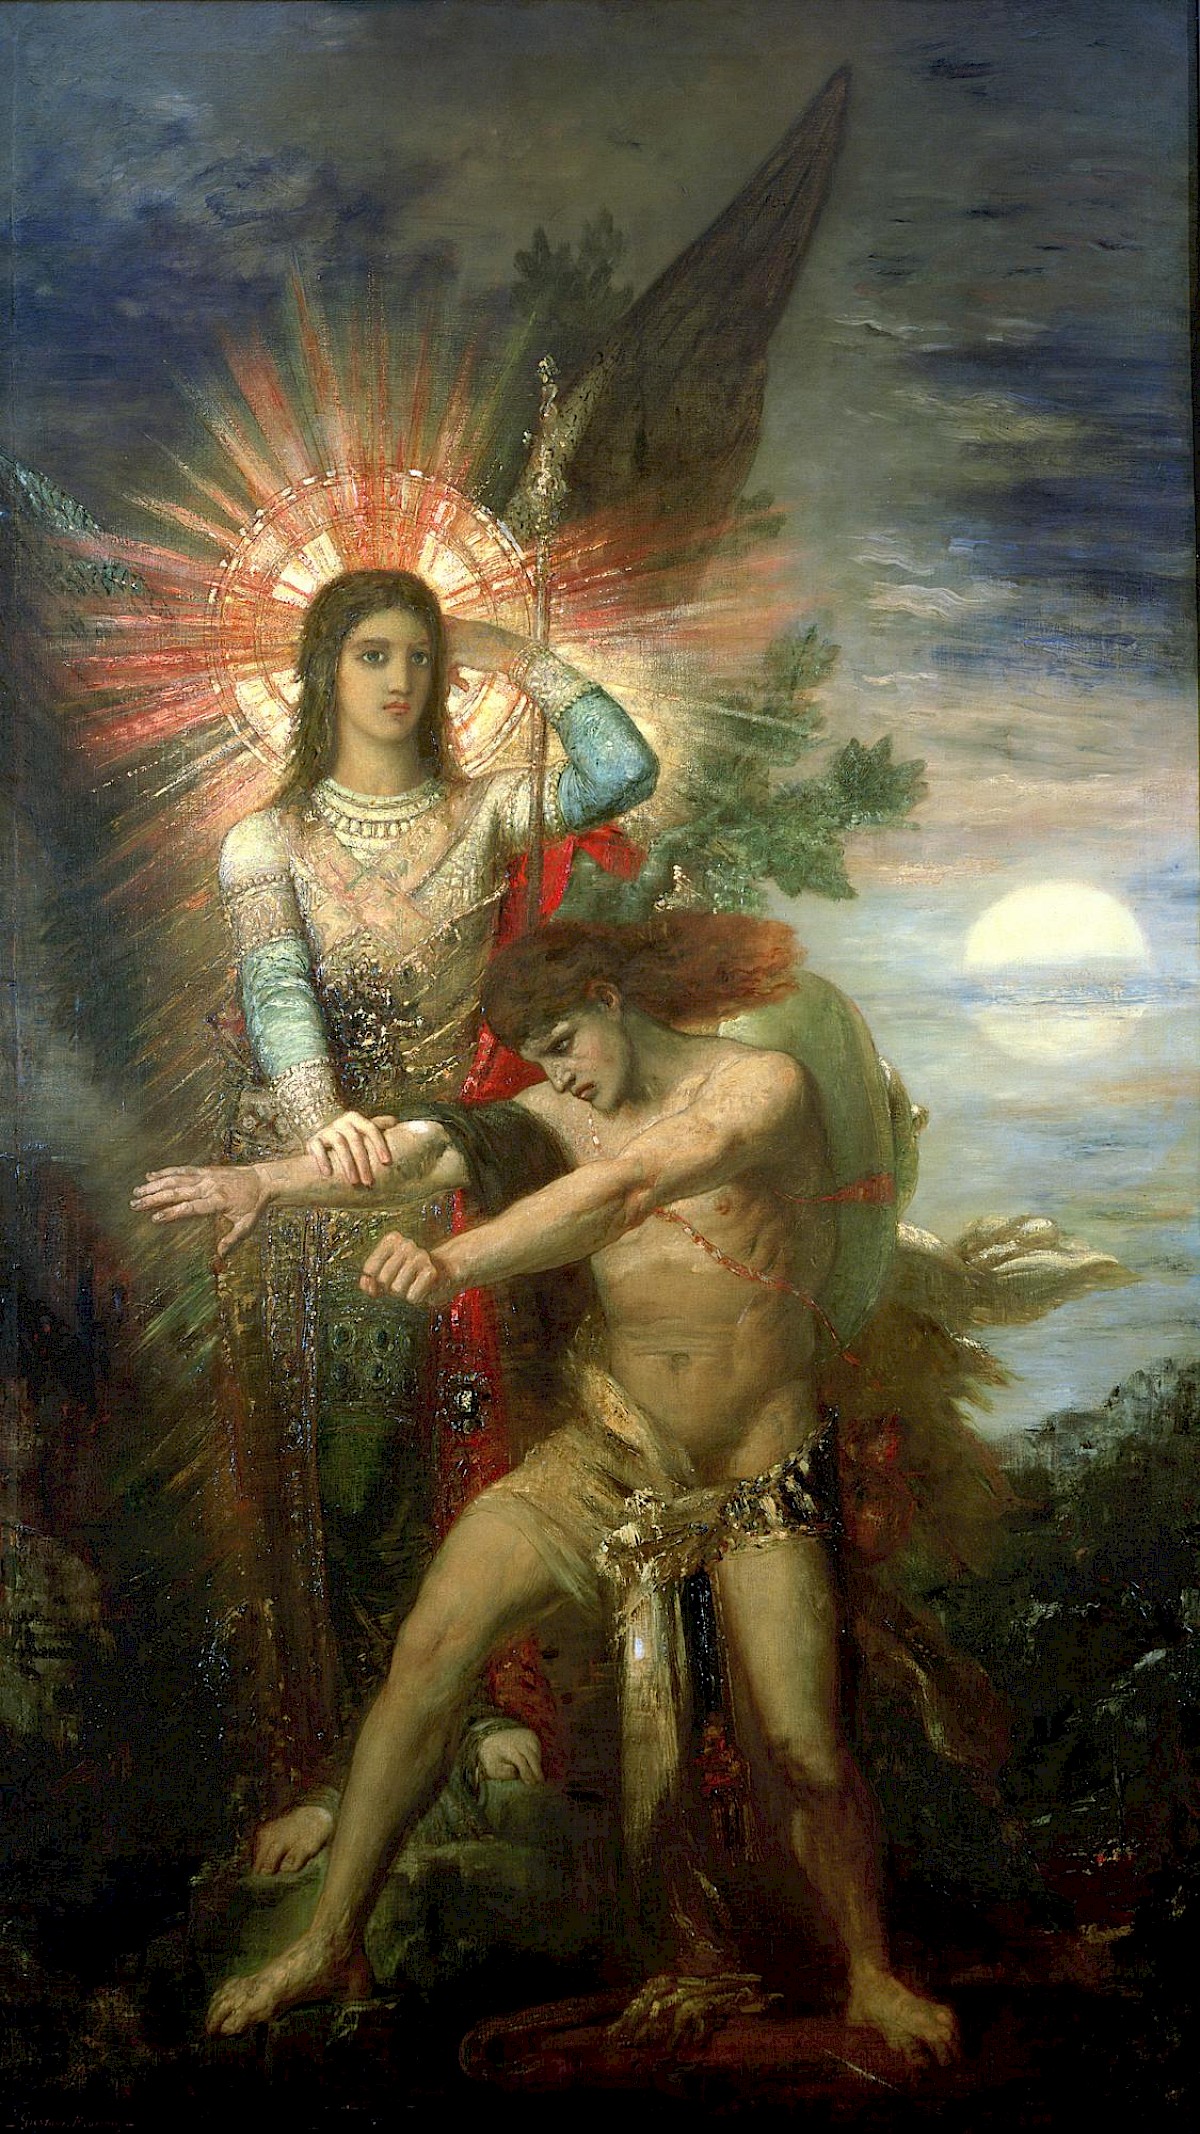 Gustave Moreau - Jacob and the Angel, 1878 | Trivium Art History